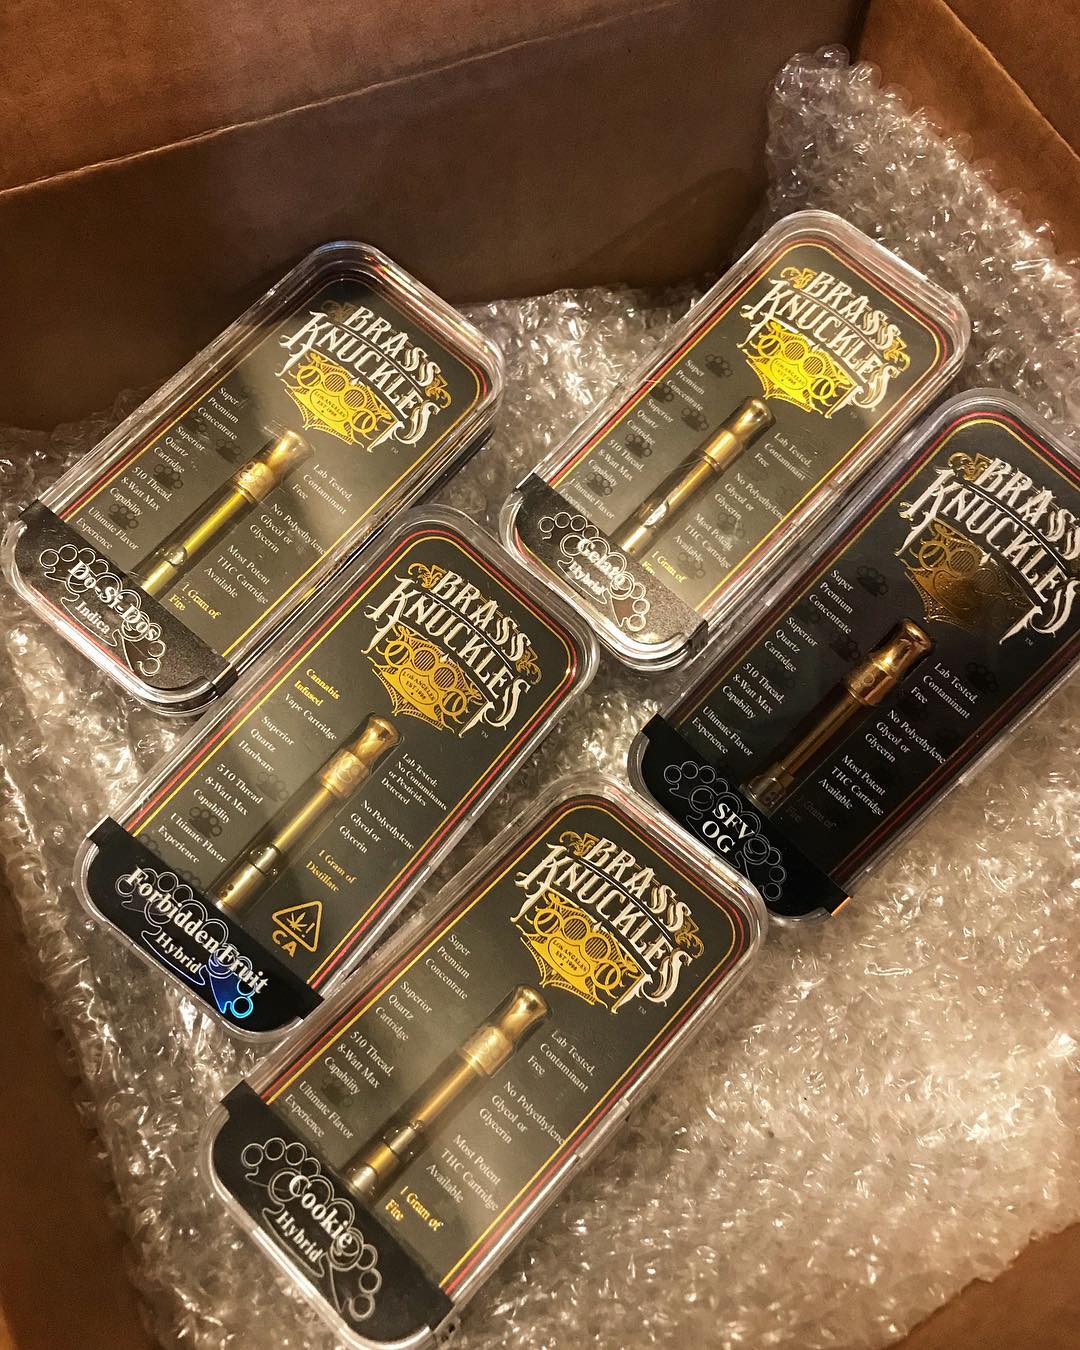 Where to buy brass knuckles vape online Knuckle up! WThey are renowned for their potency and their oil cartridges, brass knuckles carts delivers top....